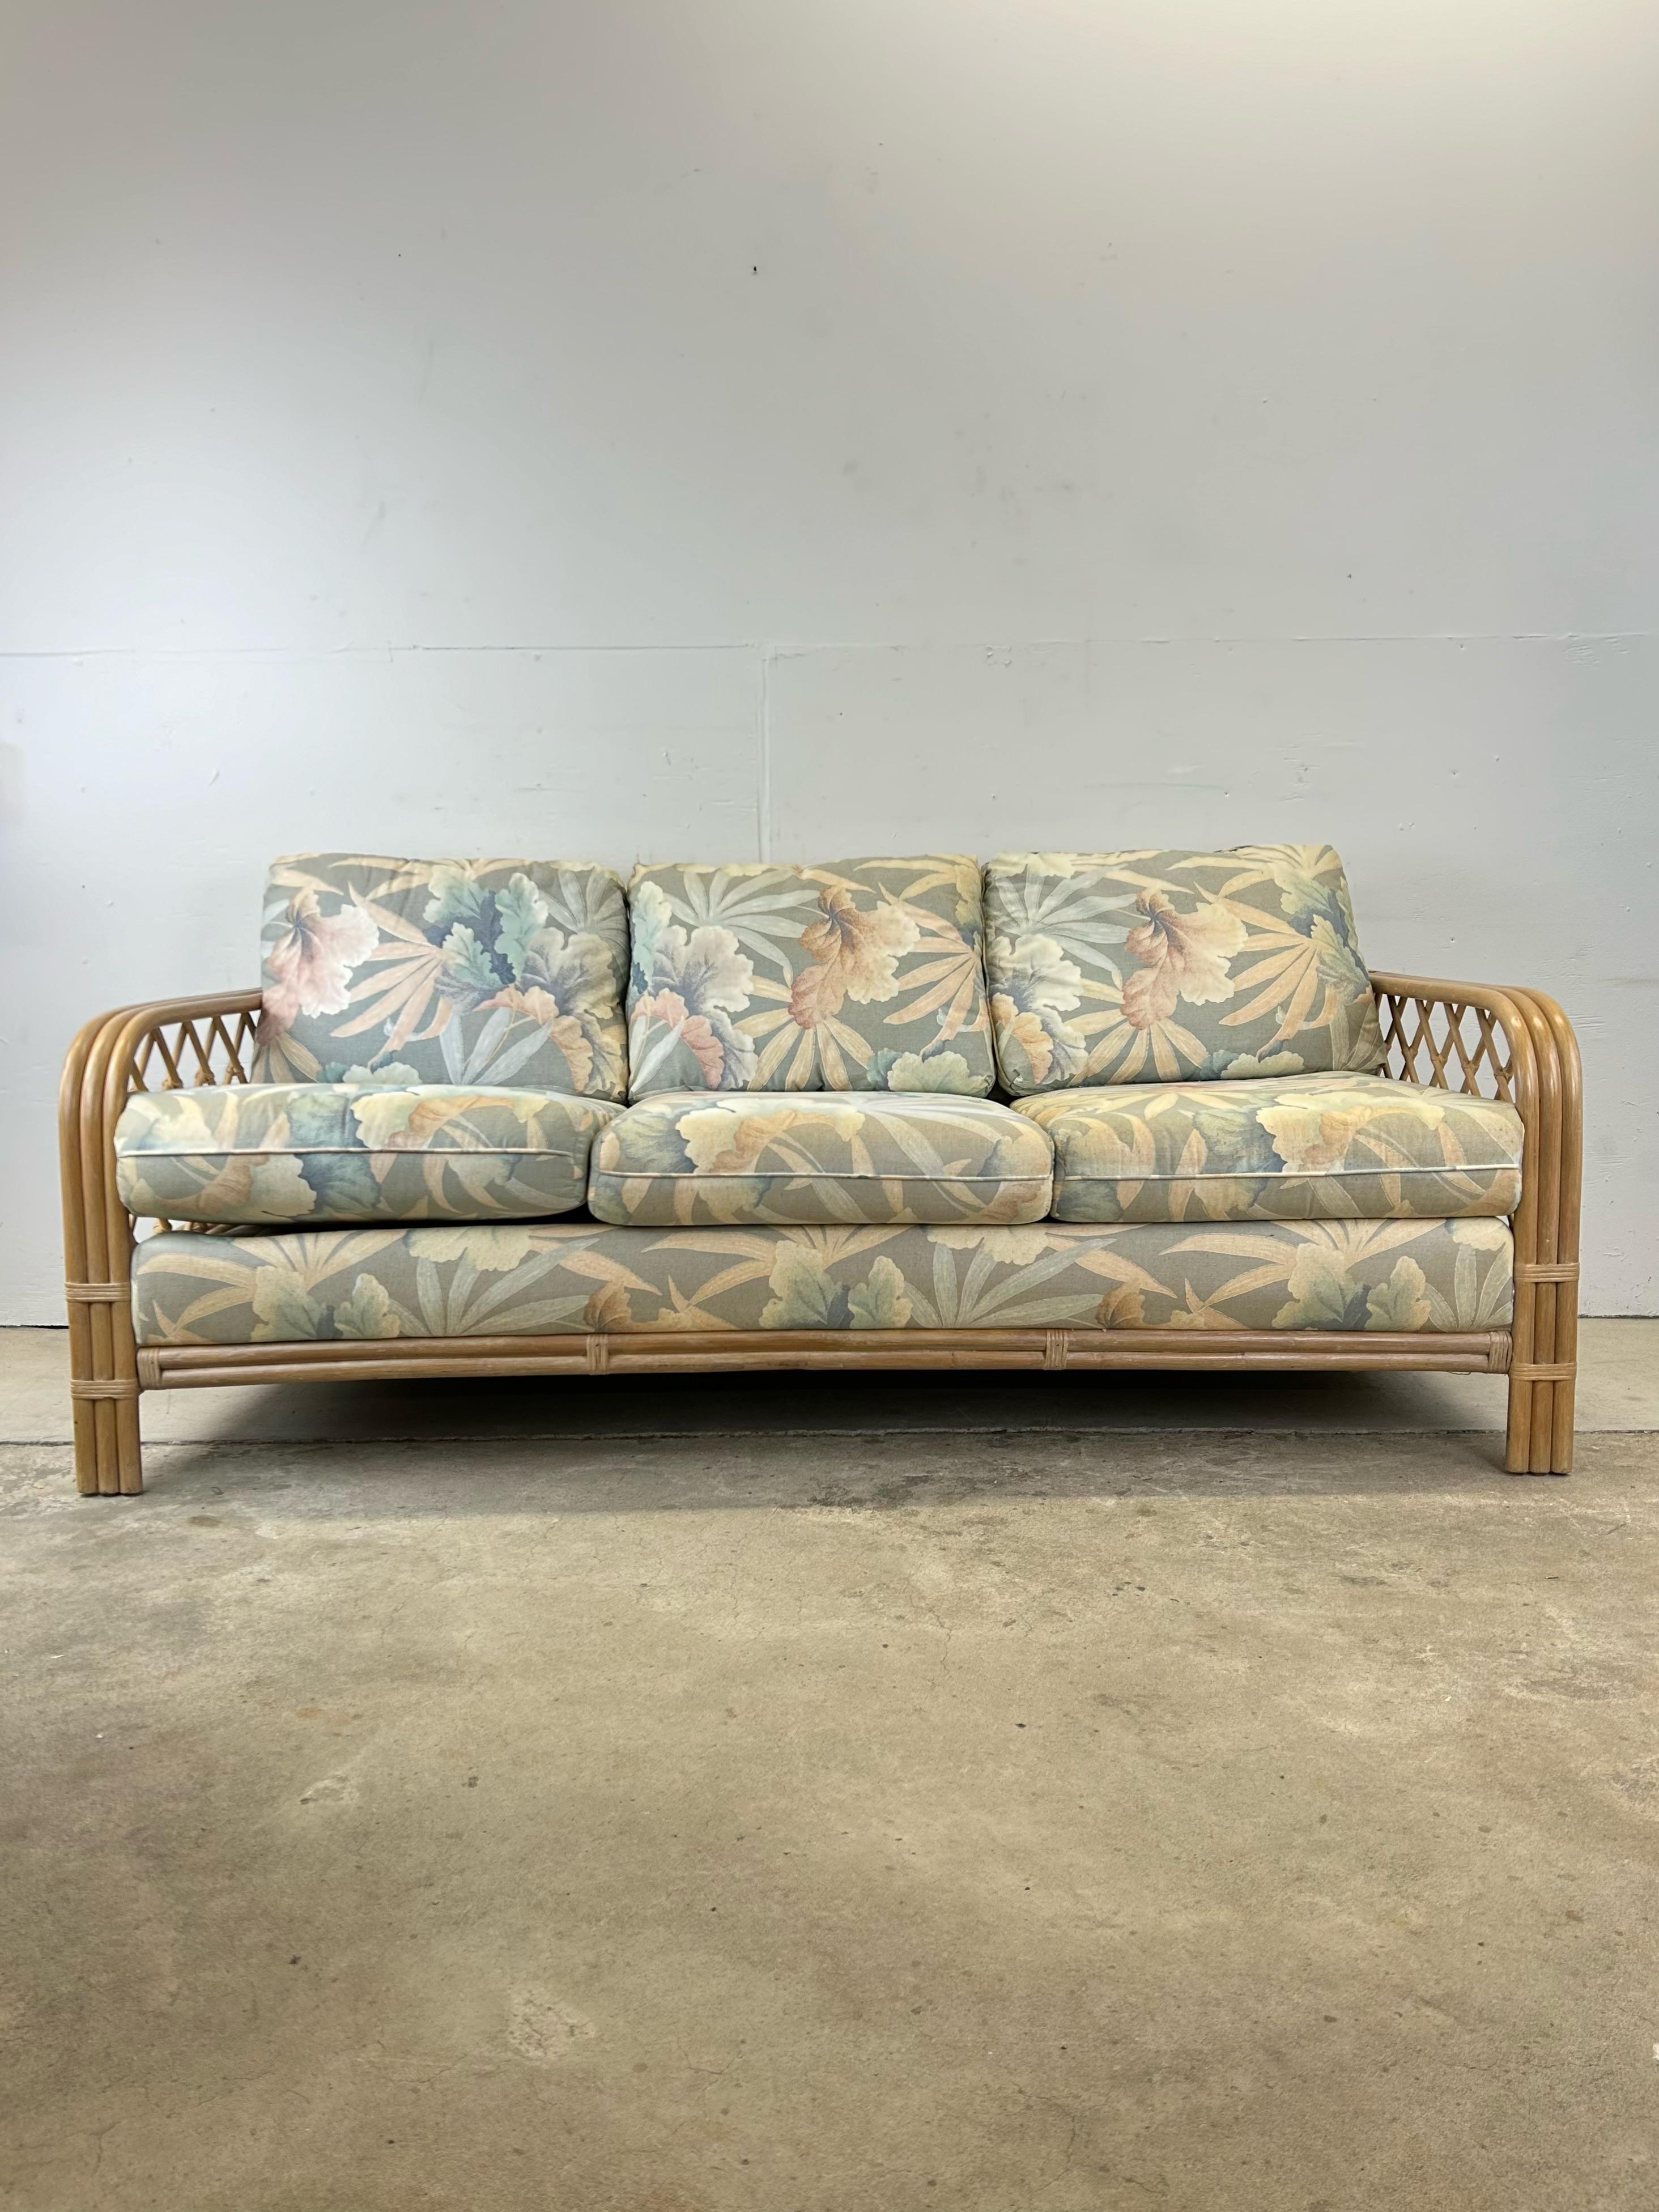 This vintage sofa features white washed rattan frame with bentwood arm rests and removable cushions with original floral upholstery. 

Matching loveseat available separately.  

Dimensions: 78w 34d 32h 20sh 25ah

Condition: White washed rattan frame